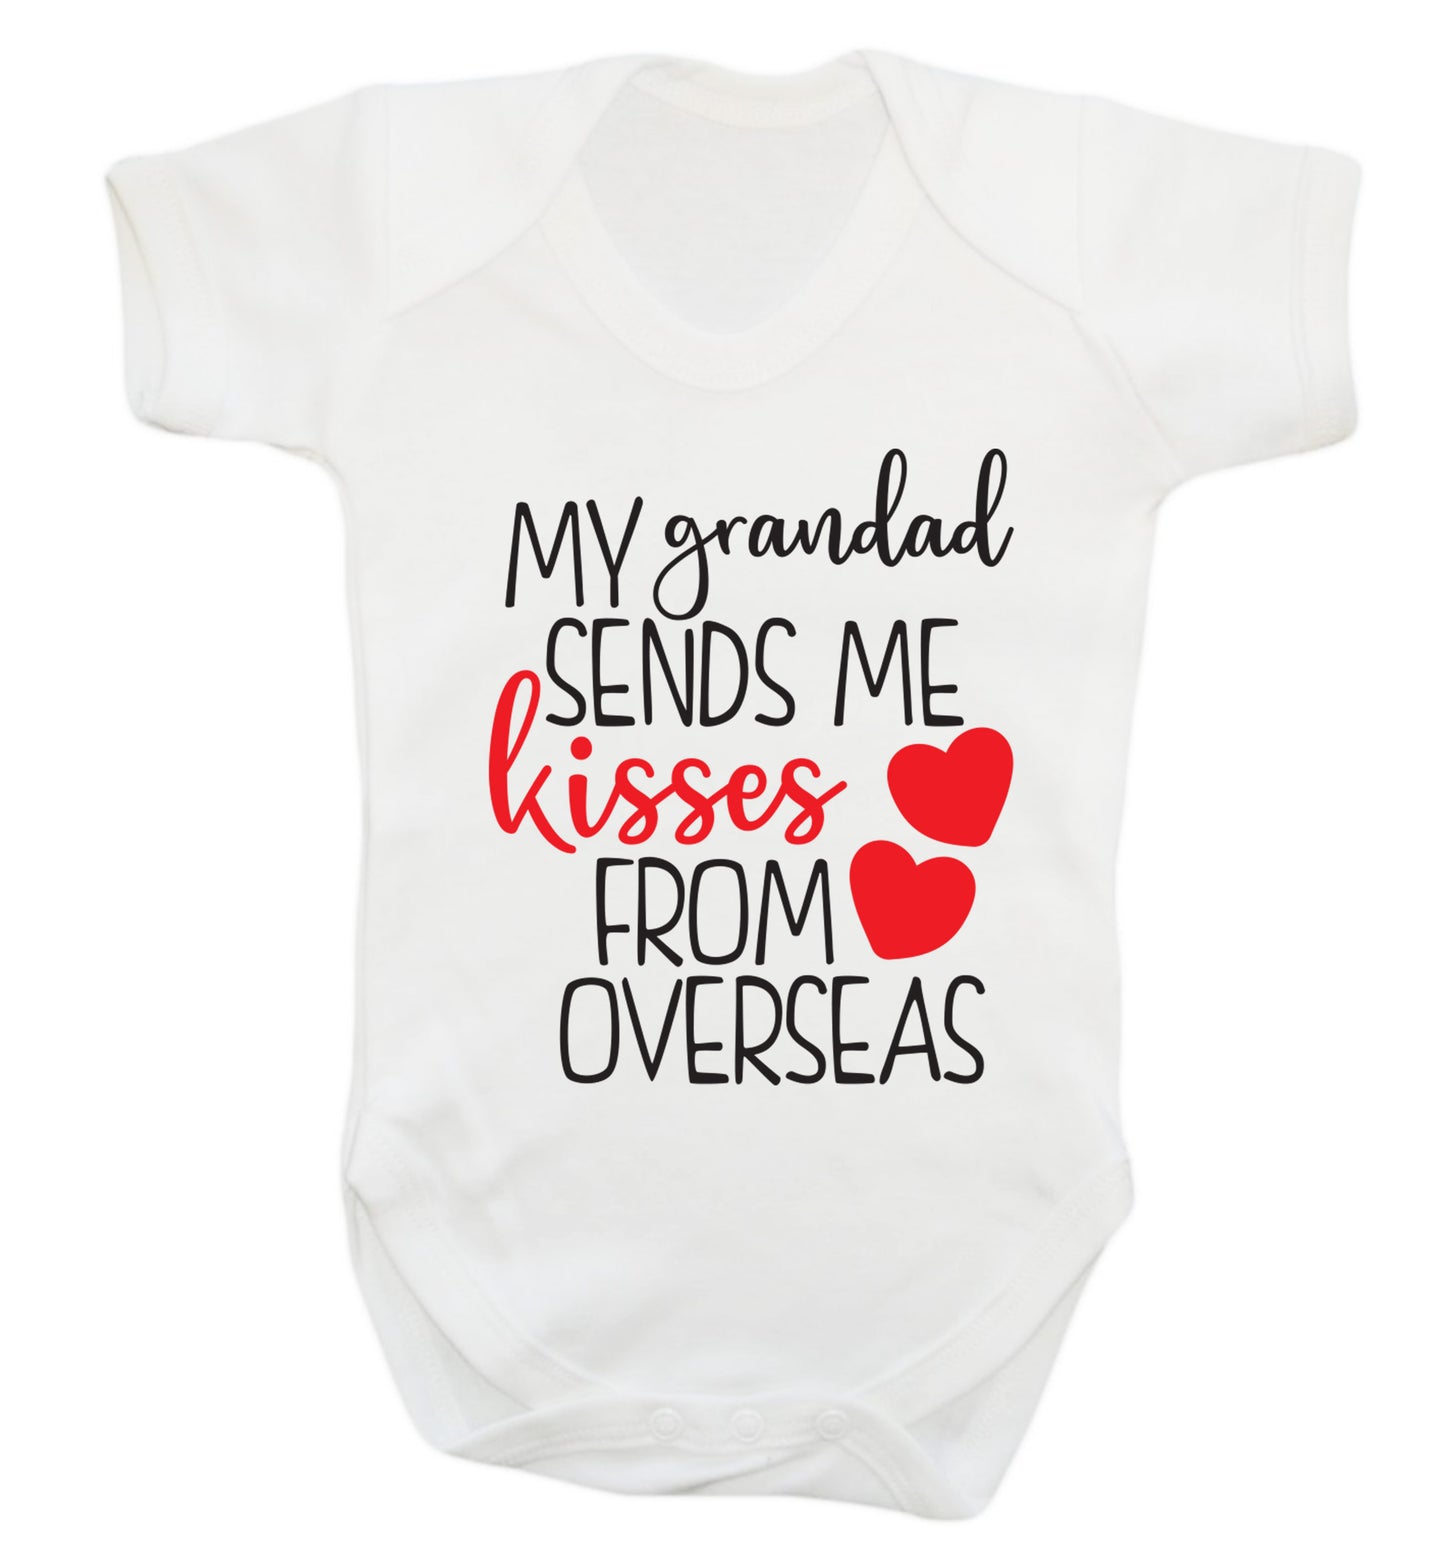 My Grandad sends me kisses from overseas Baby Vest white 18-24 months